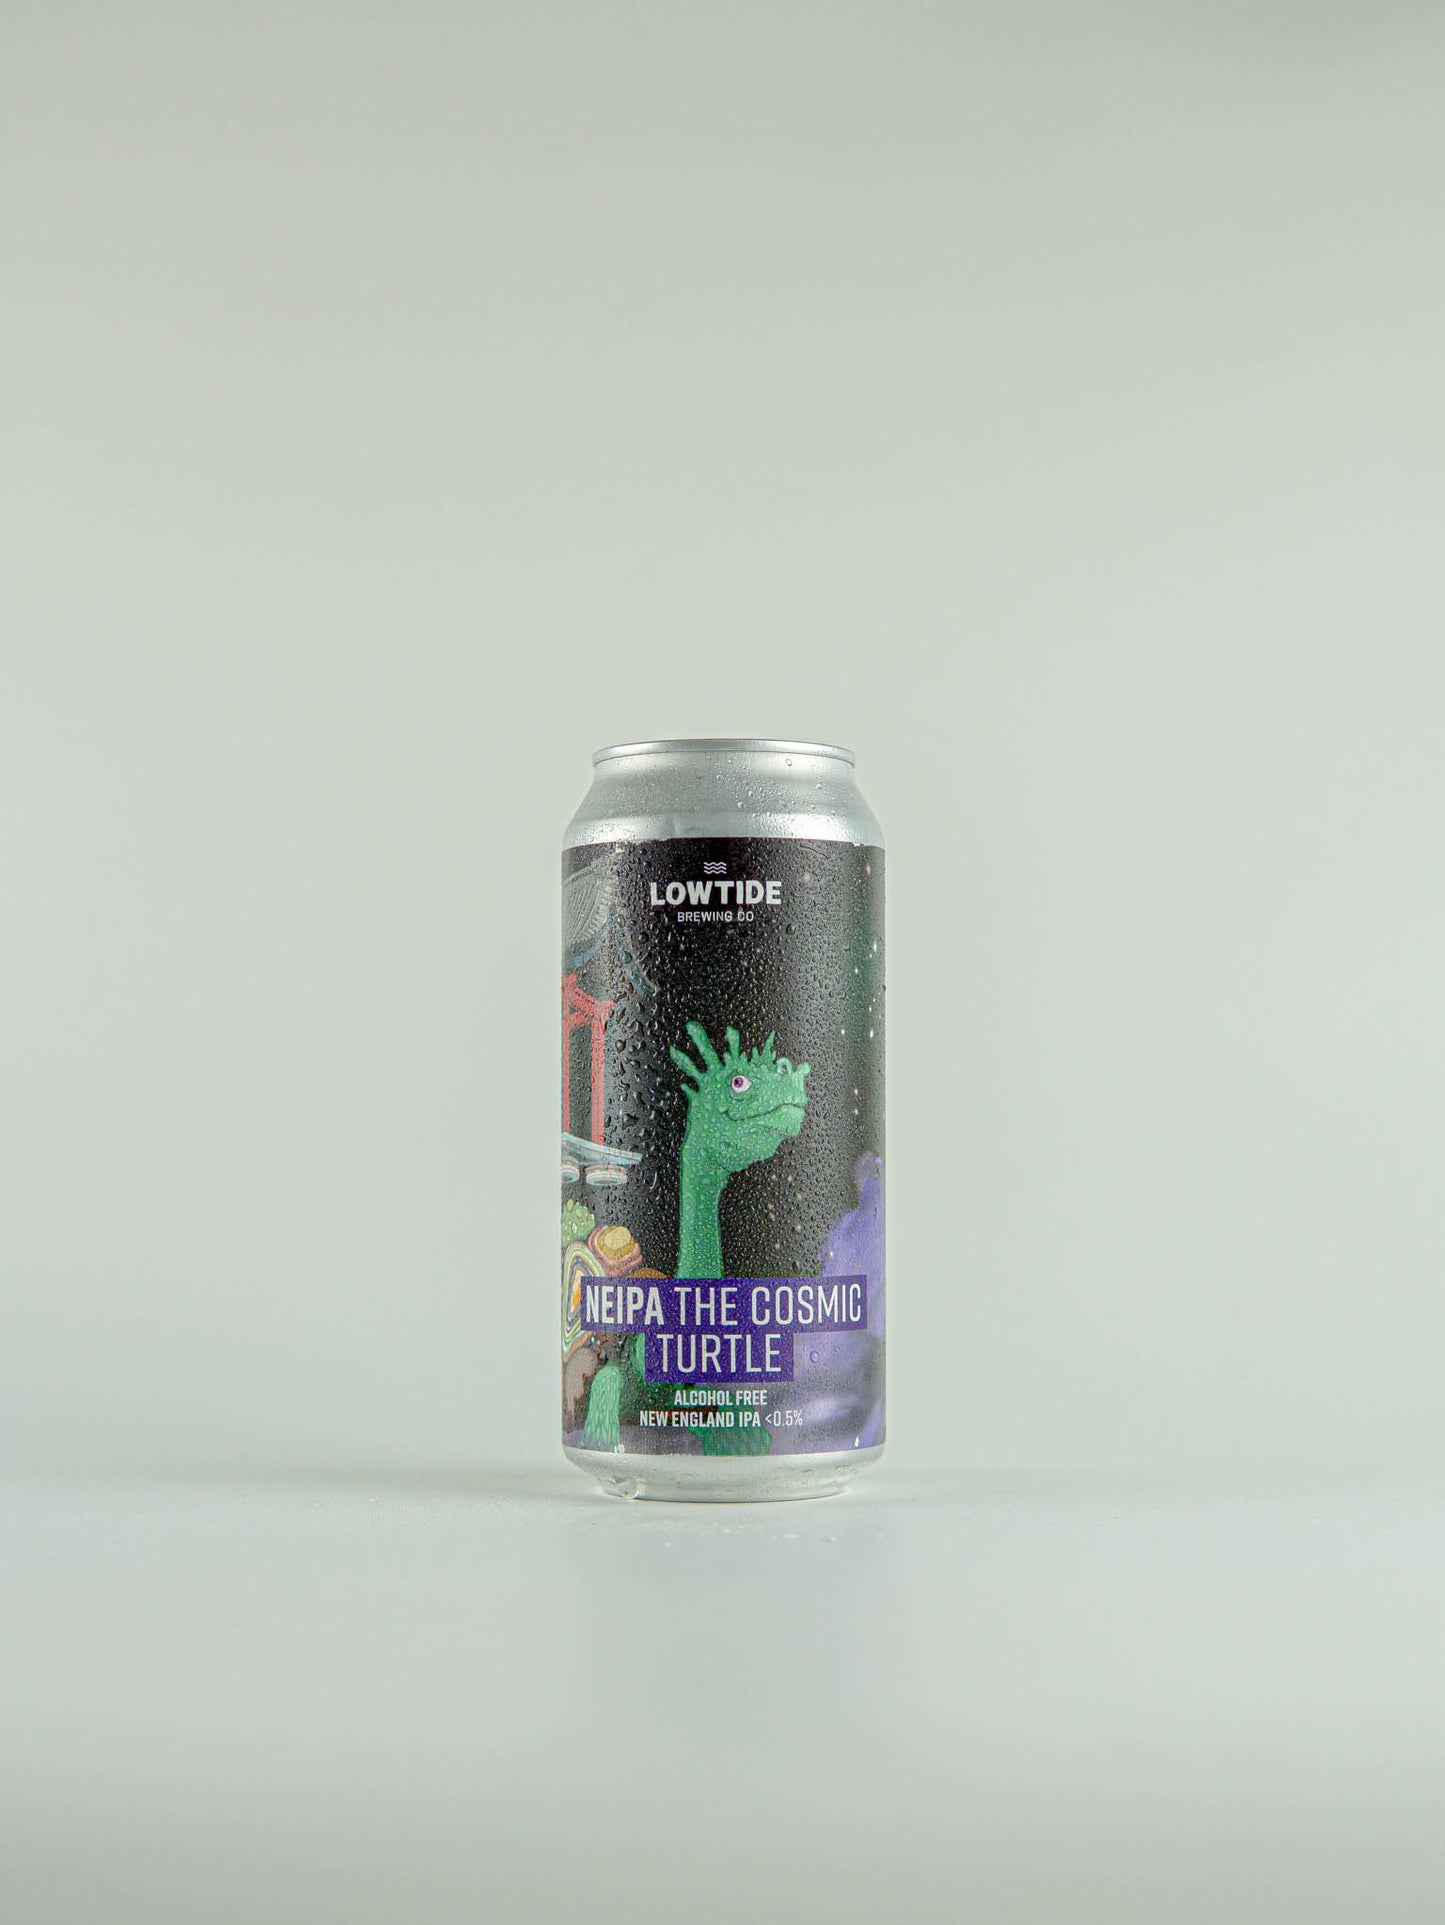 Lowtide Brewing Co NEIPA The Cosmic Turtle Alcohol Free New England IPA 0.5% - 440ml